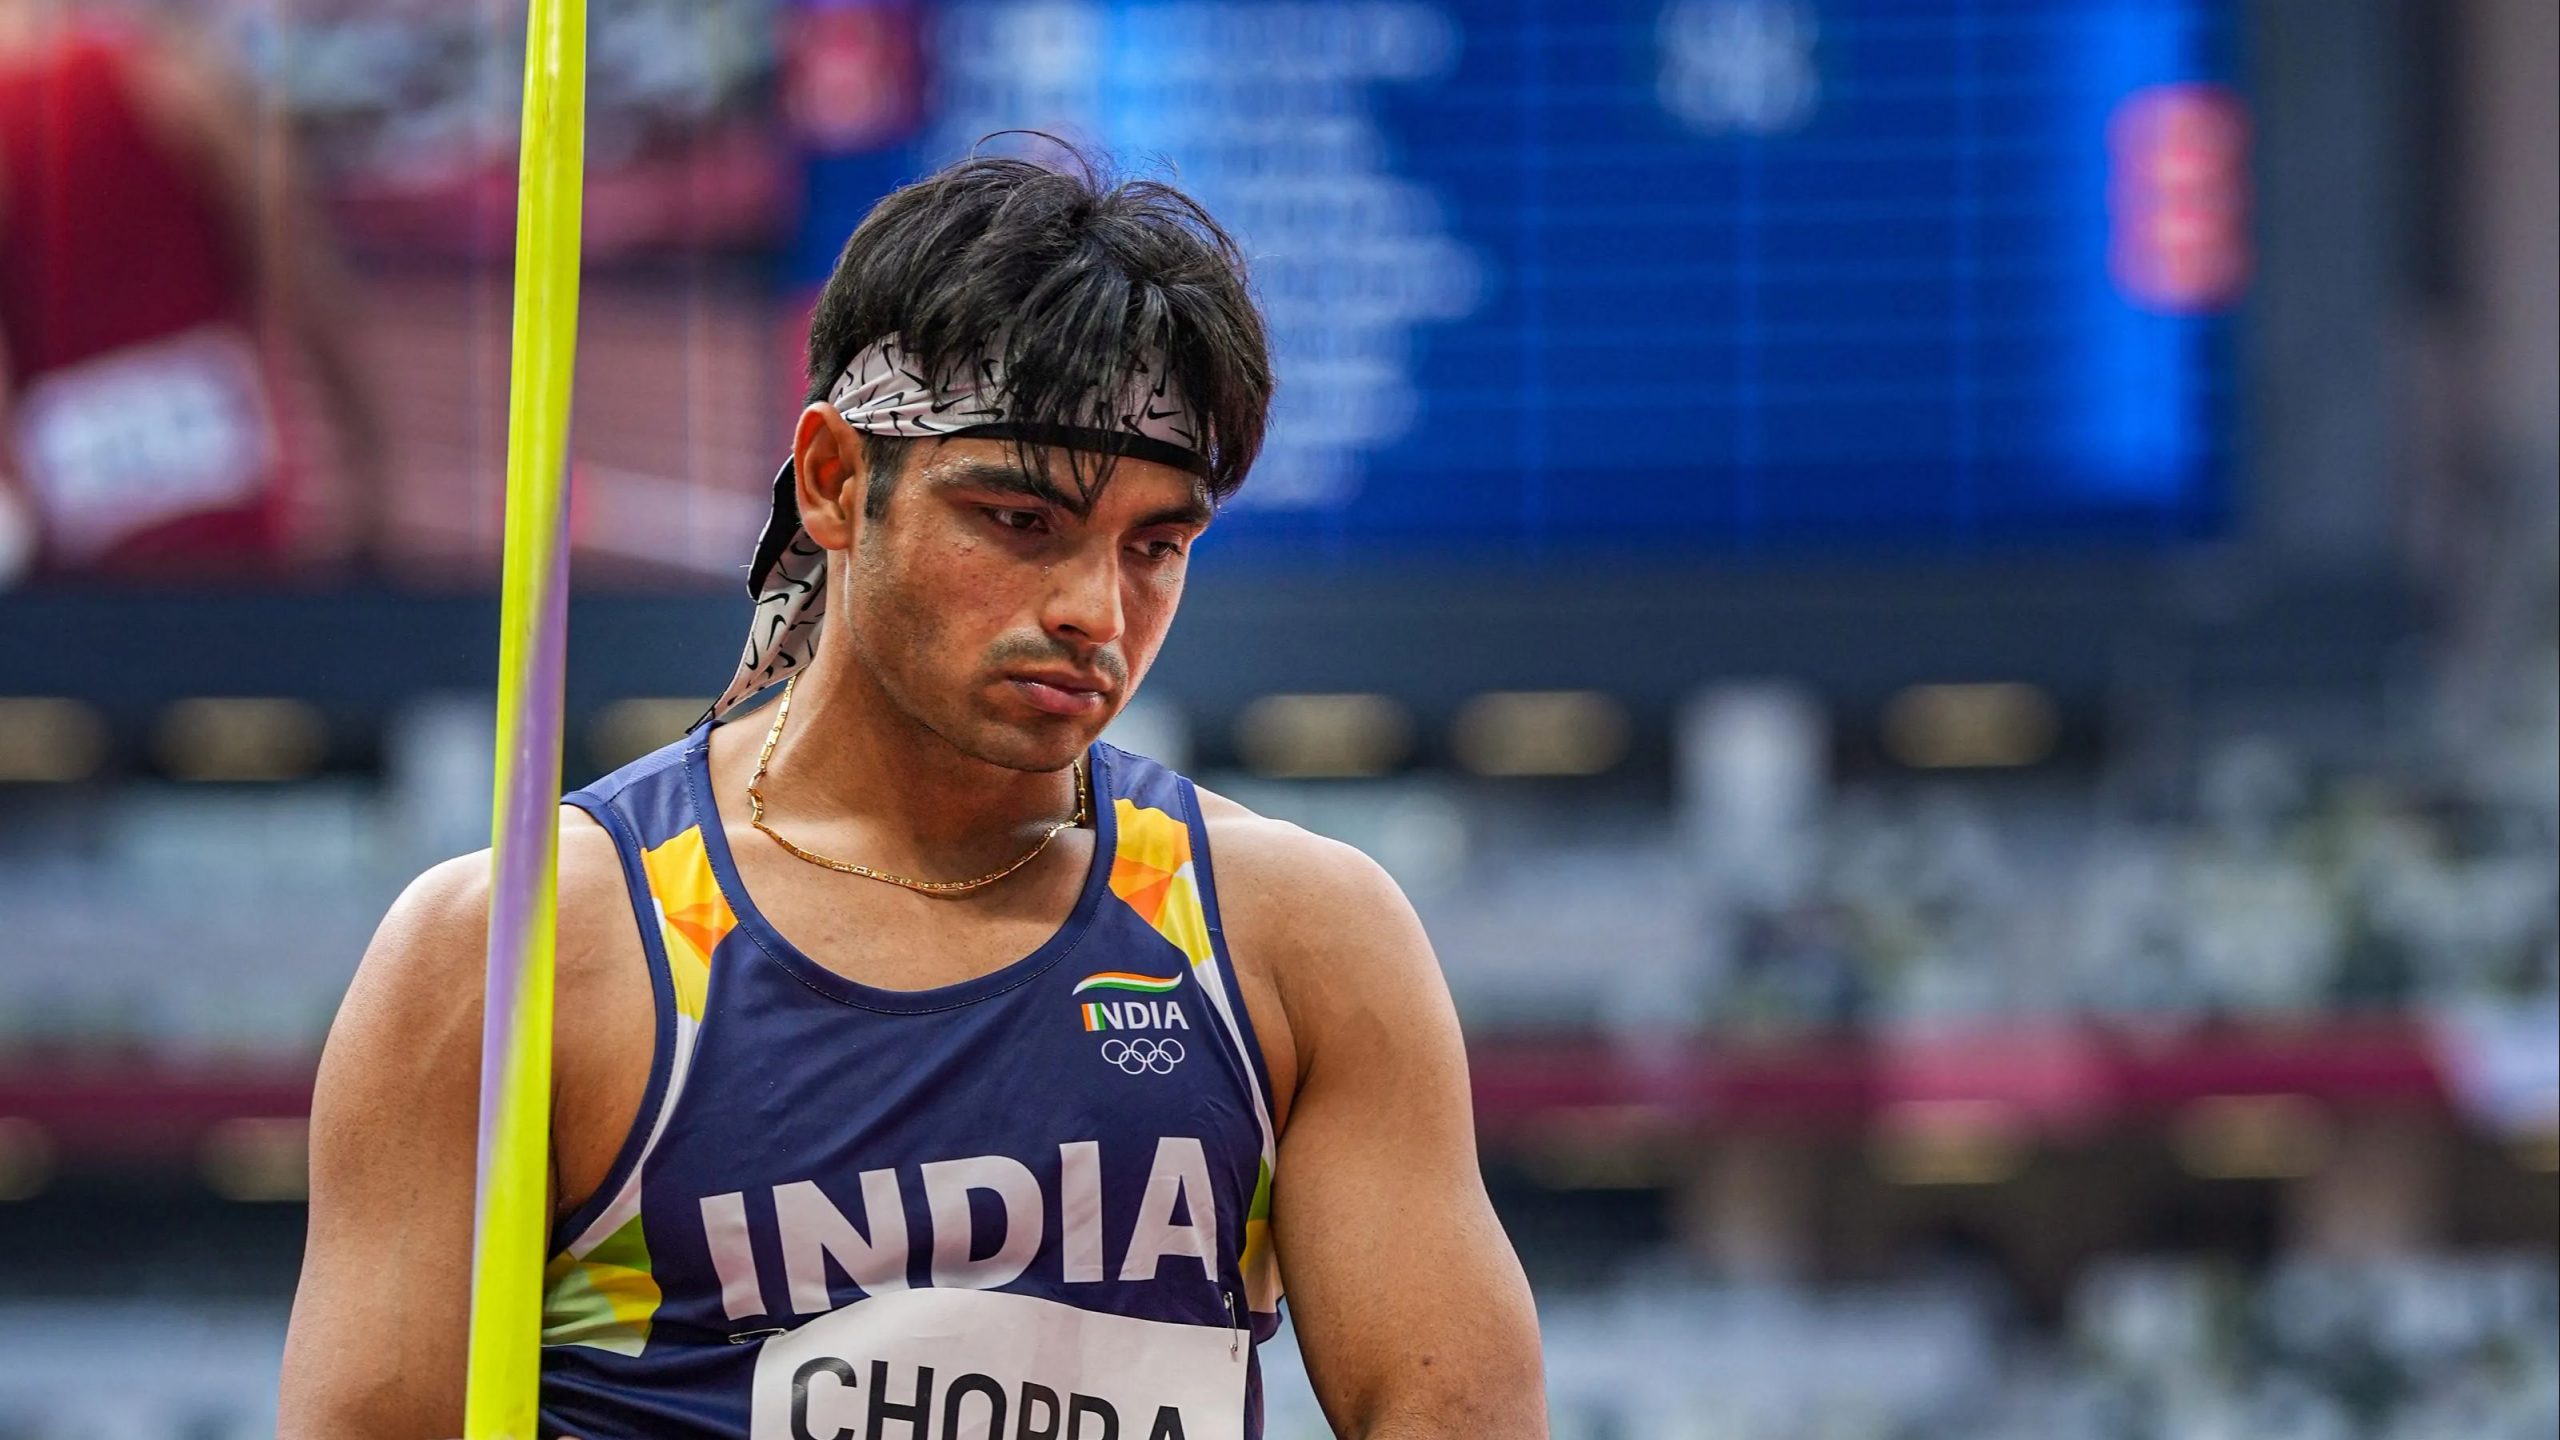 An Olympic gold and Neeraj Chopra’s brand value is at par with Virat Kohli